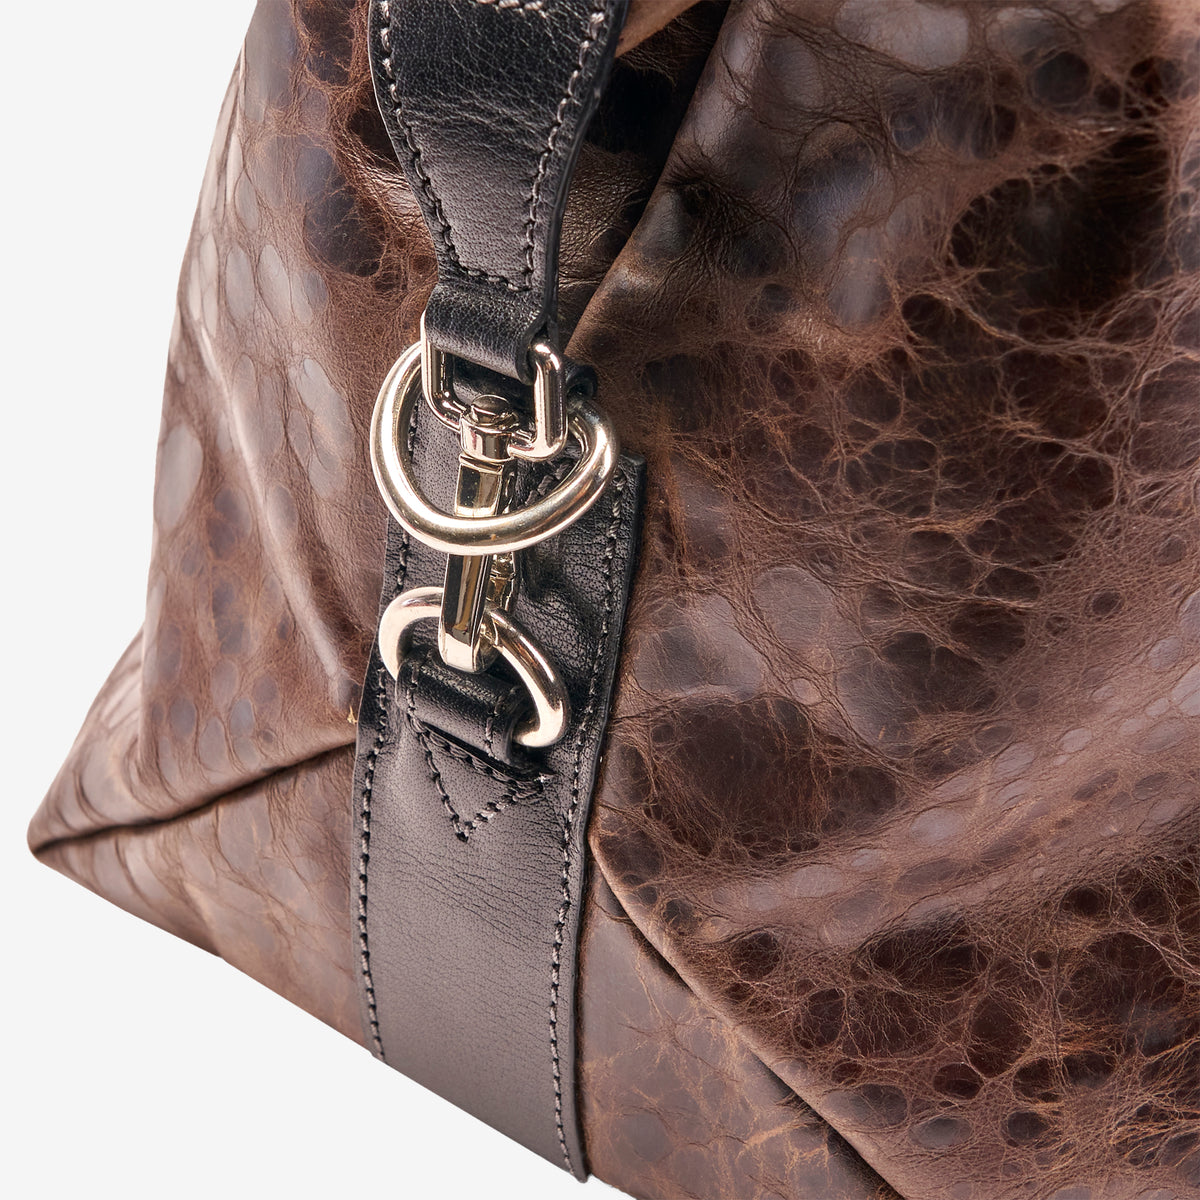 tusk-9920-spotty-leather-everyday-duffel-bag-chocolate-detail-2